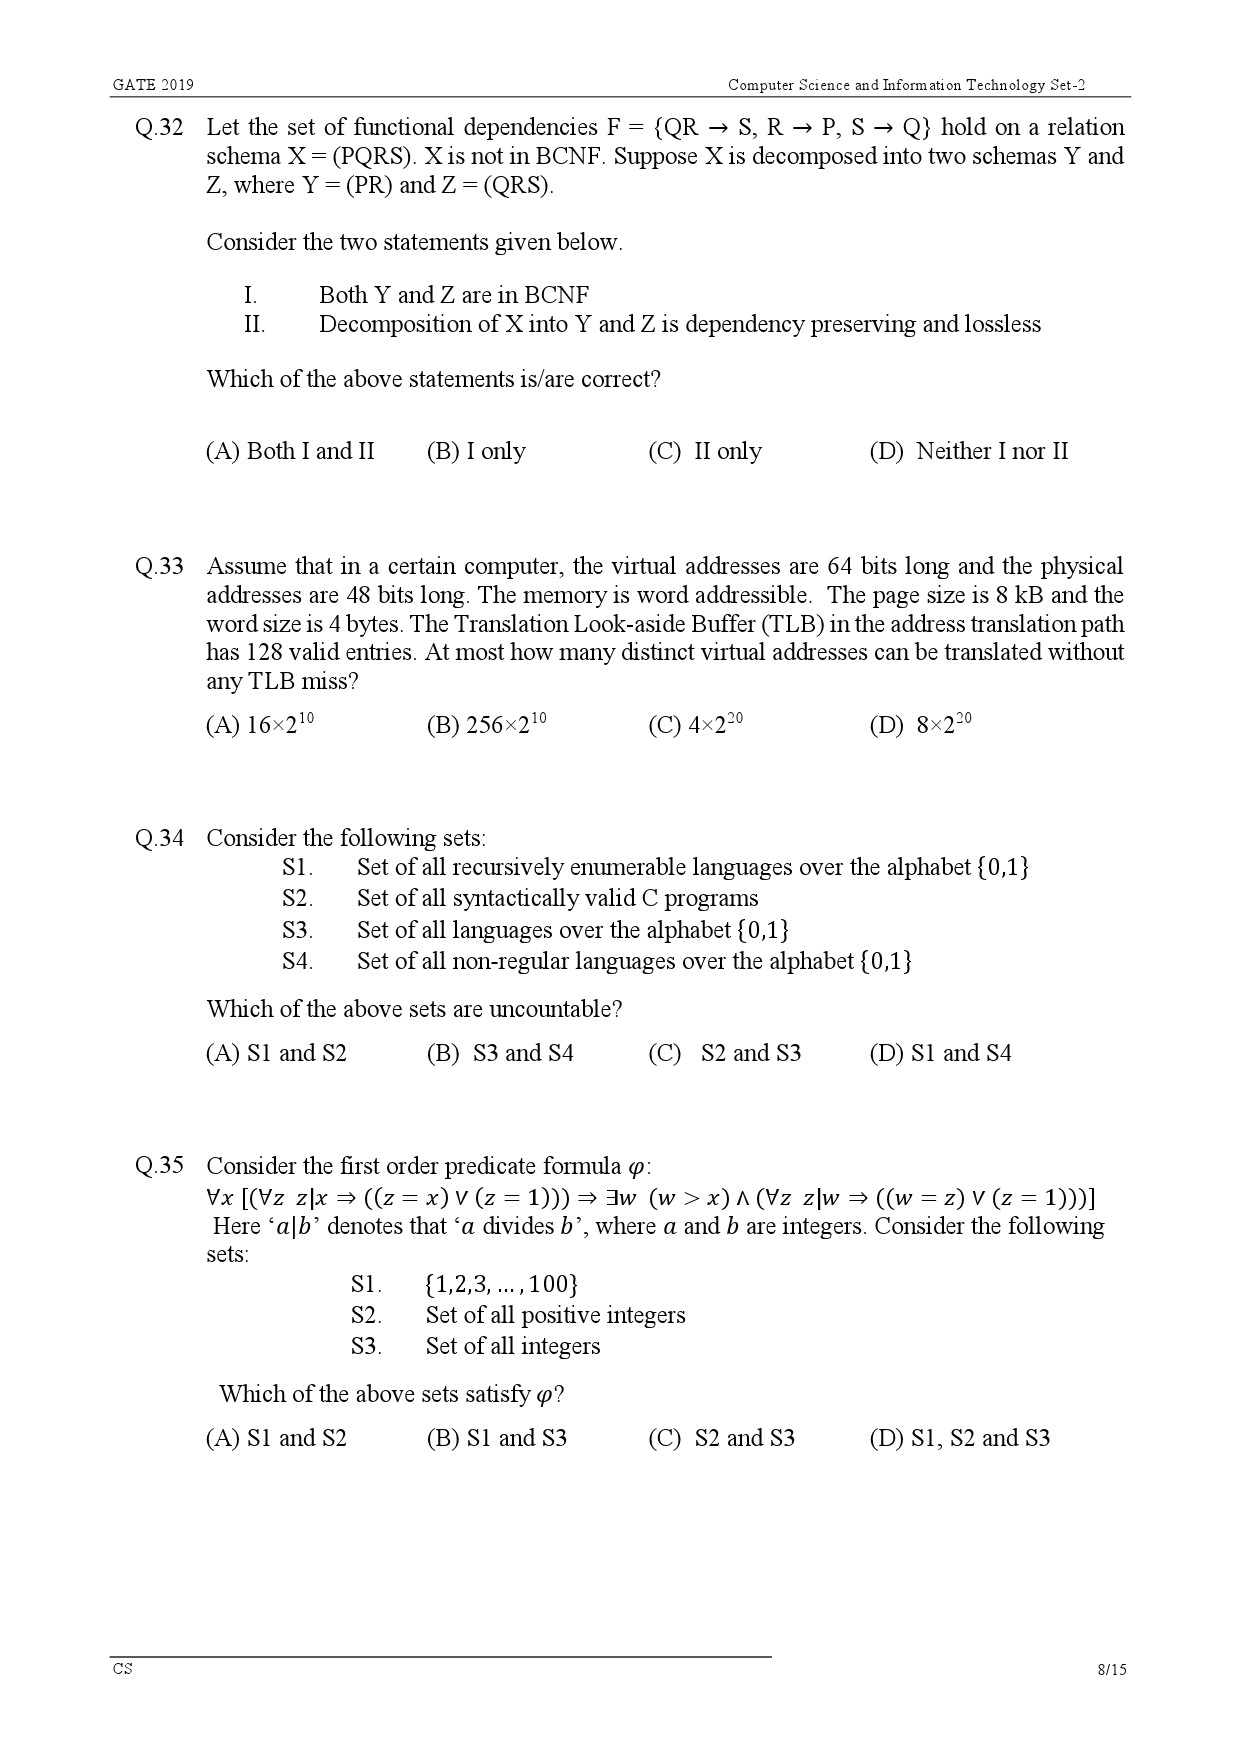 GATE Exam Question Paper 2019 Computer Science and Information Technology 11